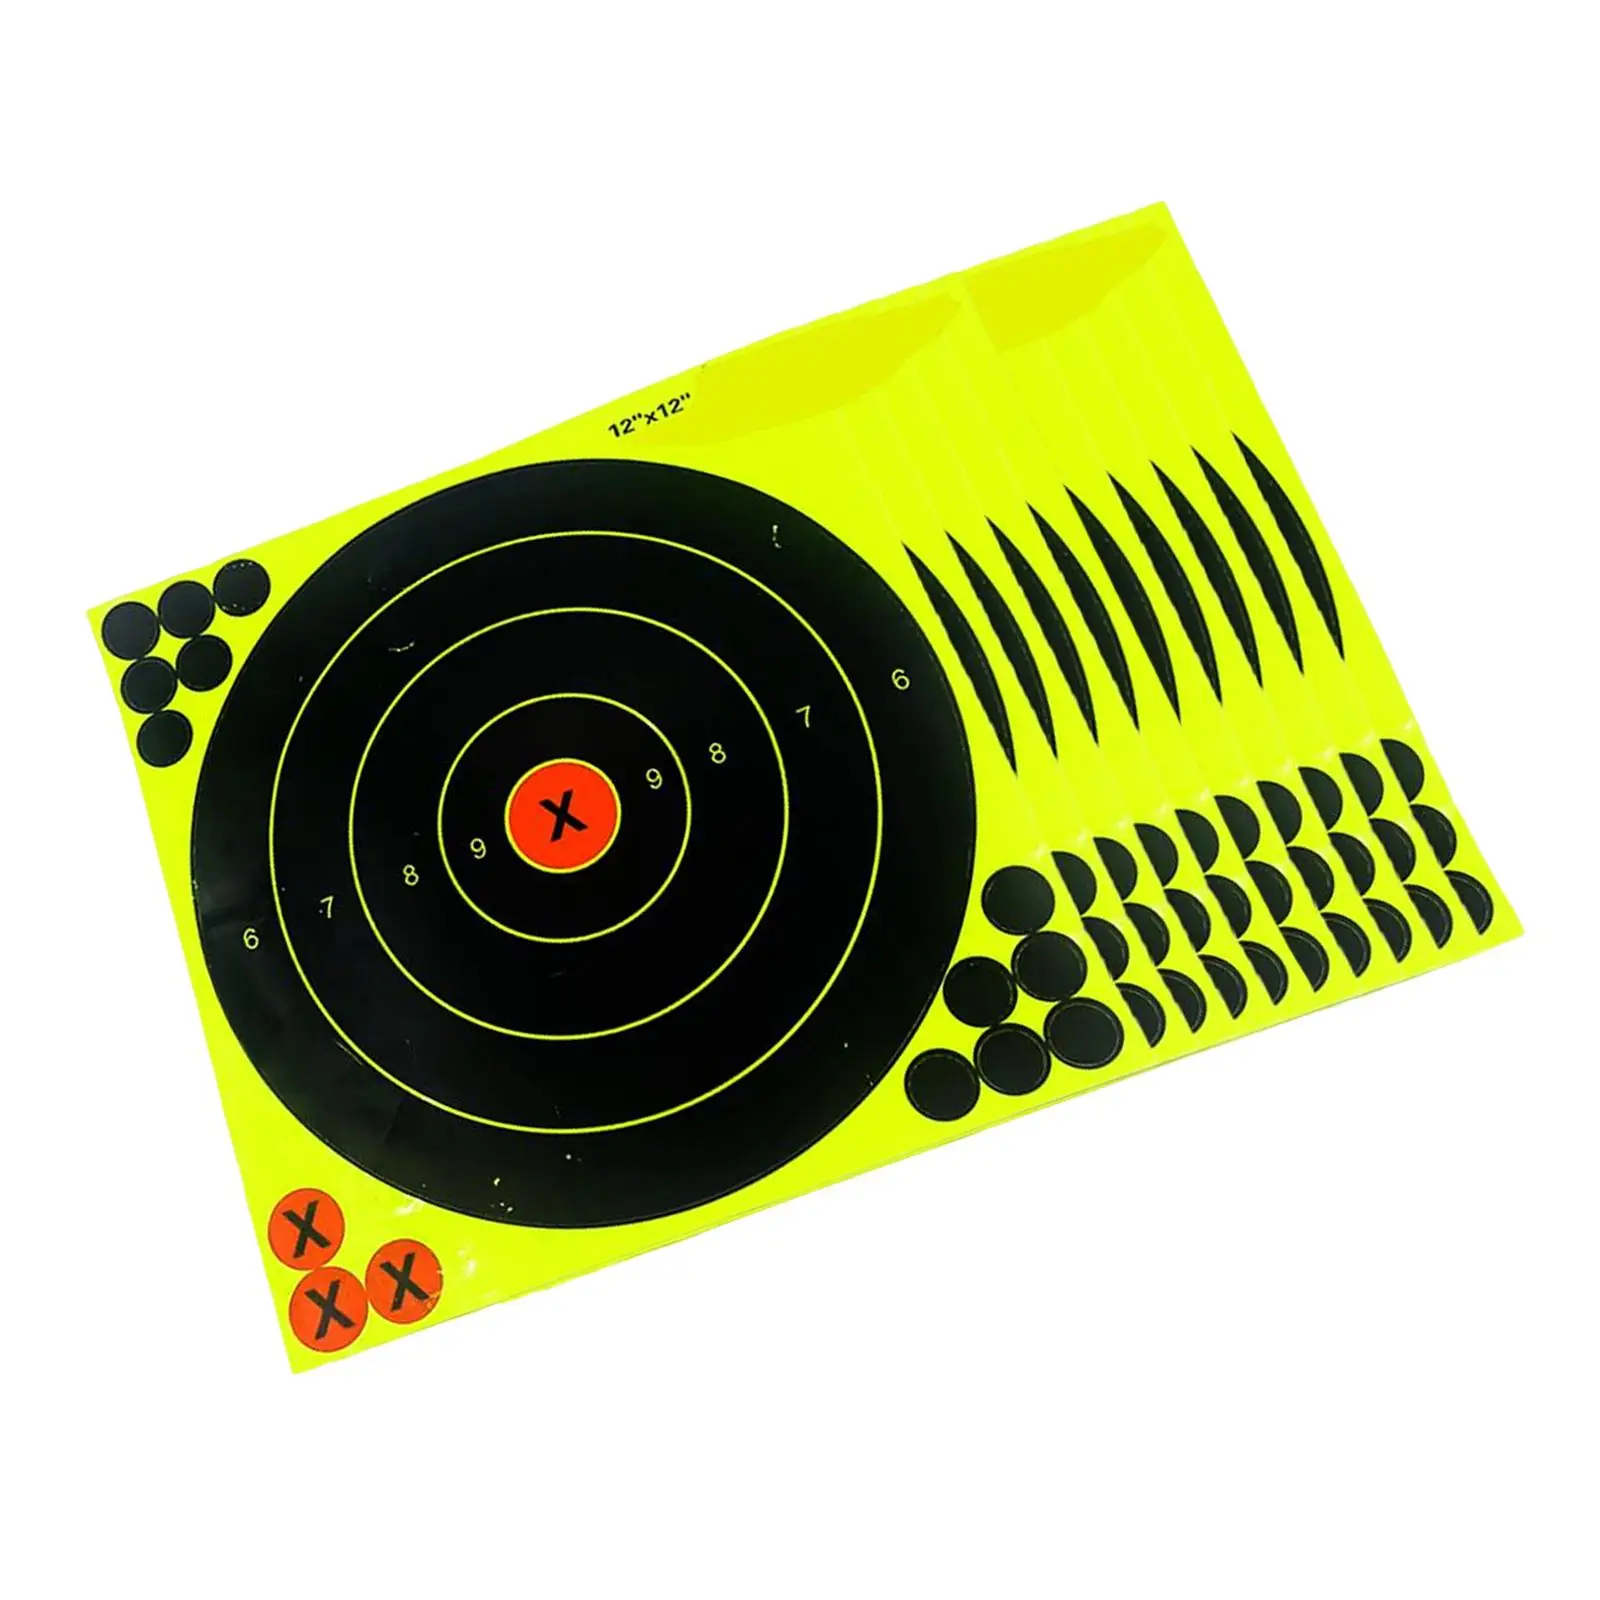 10x 12inch Shooting Targets Splatter Reactive Paper Sticker Adhesive Paste Paper Target for Outdoor Training Range Practice Bow